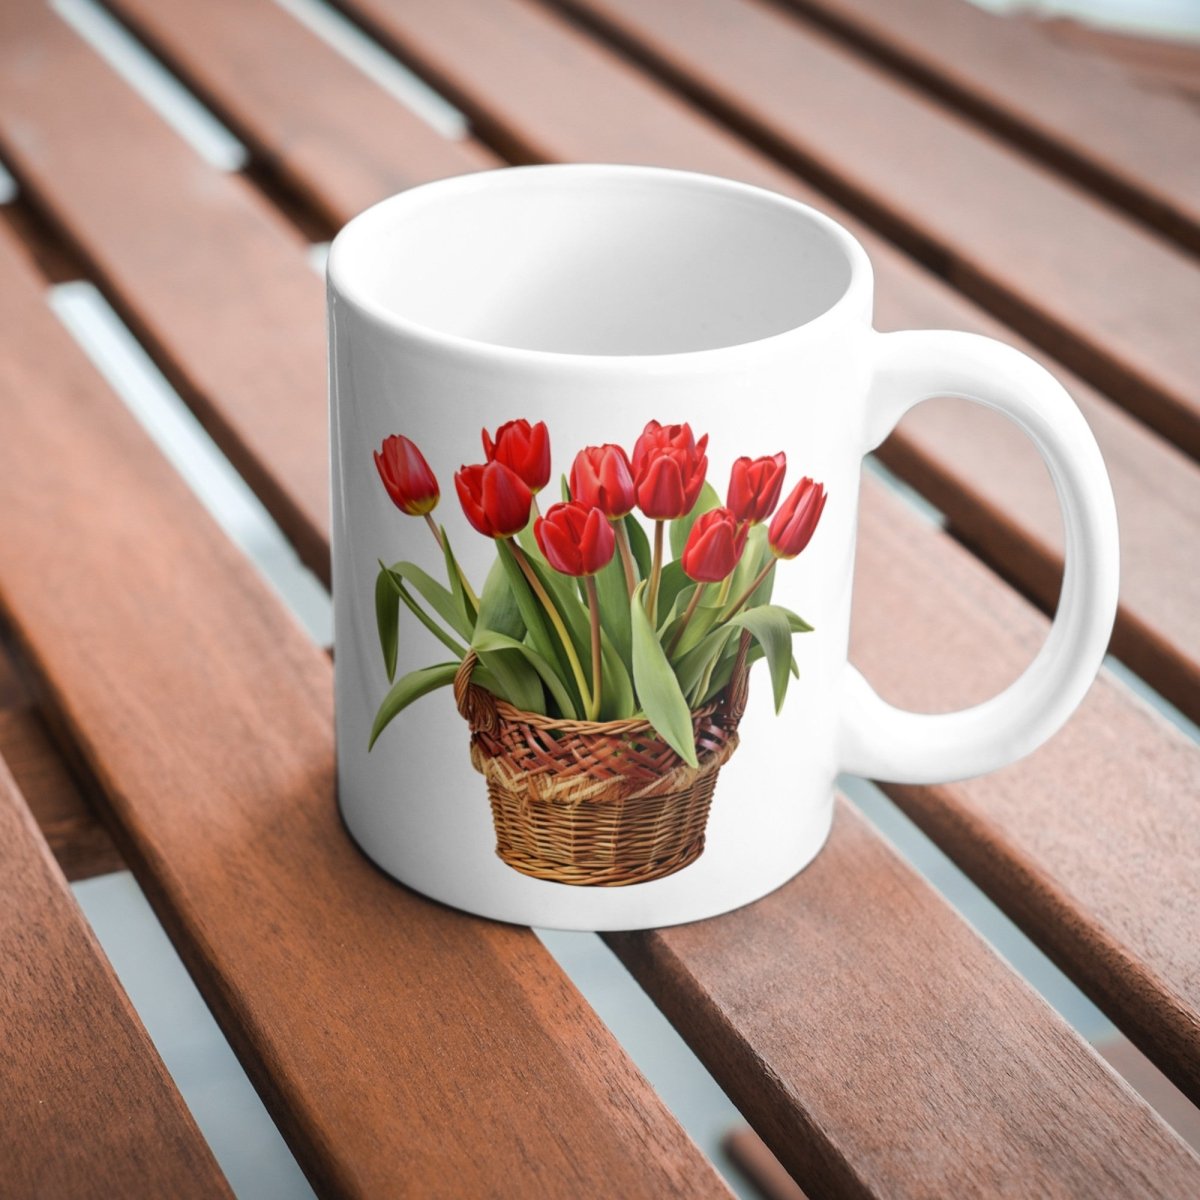 Basket with Red Tulips 6+6 PNG Bundle for Sublimation & Clipart - Everything Pixel